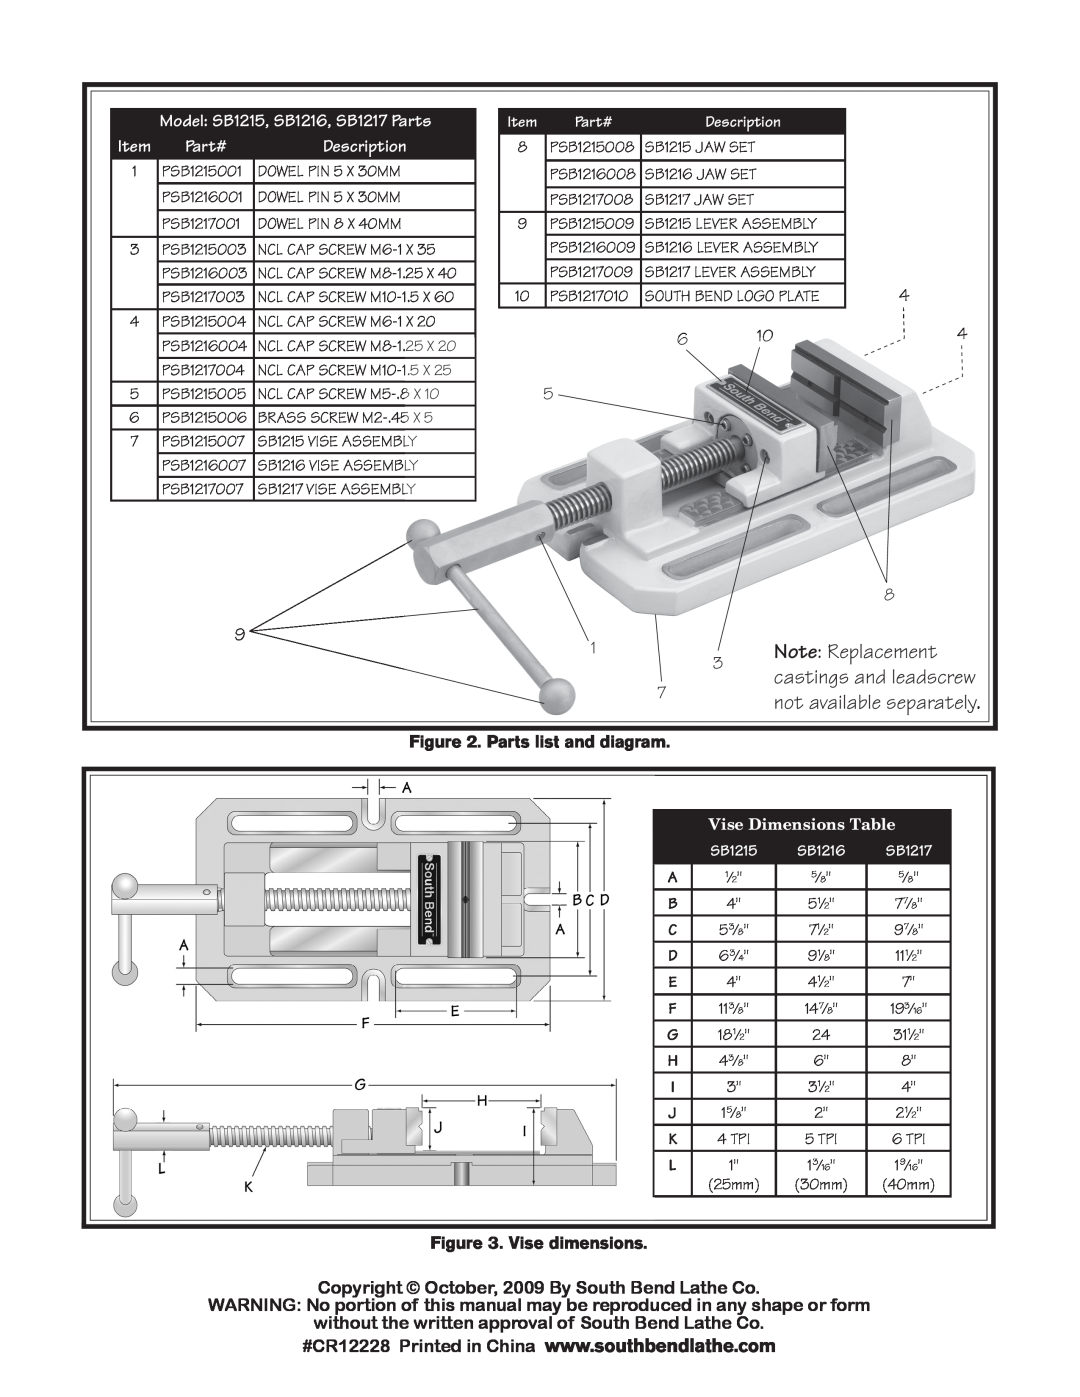 Woodstock Note Replacement, castings and leadscrew, not available separately, Model SB1215, SB1216, SB1217 Parts, Part# 